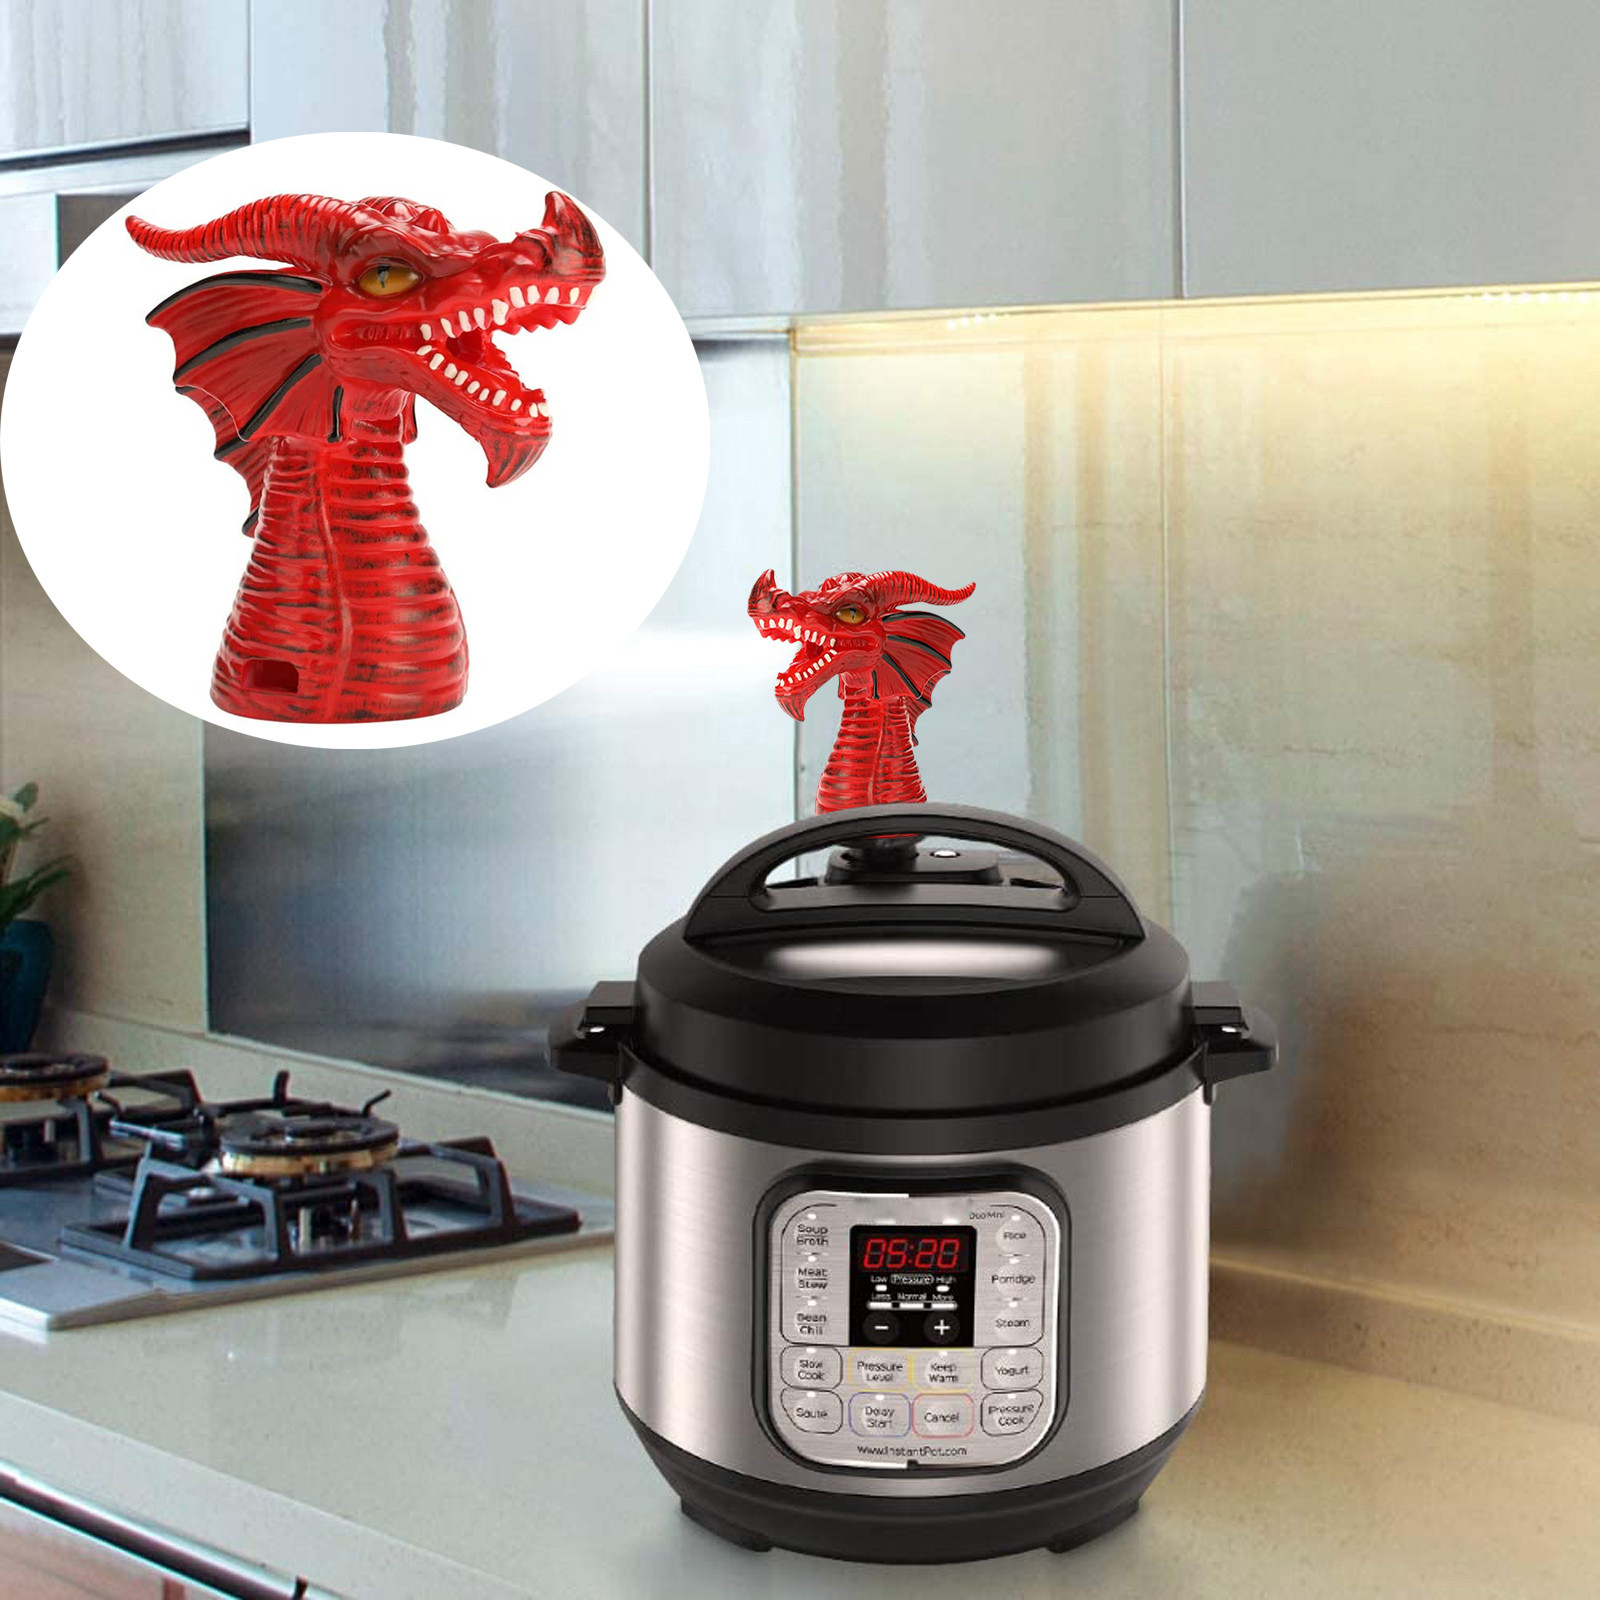 Cookware Parts Fire-breathing Dragon Steam Release Accessory Steam Diverter for Pressure Instant Cooker Kitchen Supplies B13